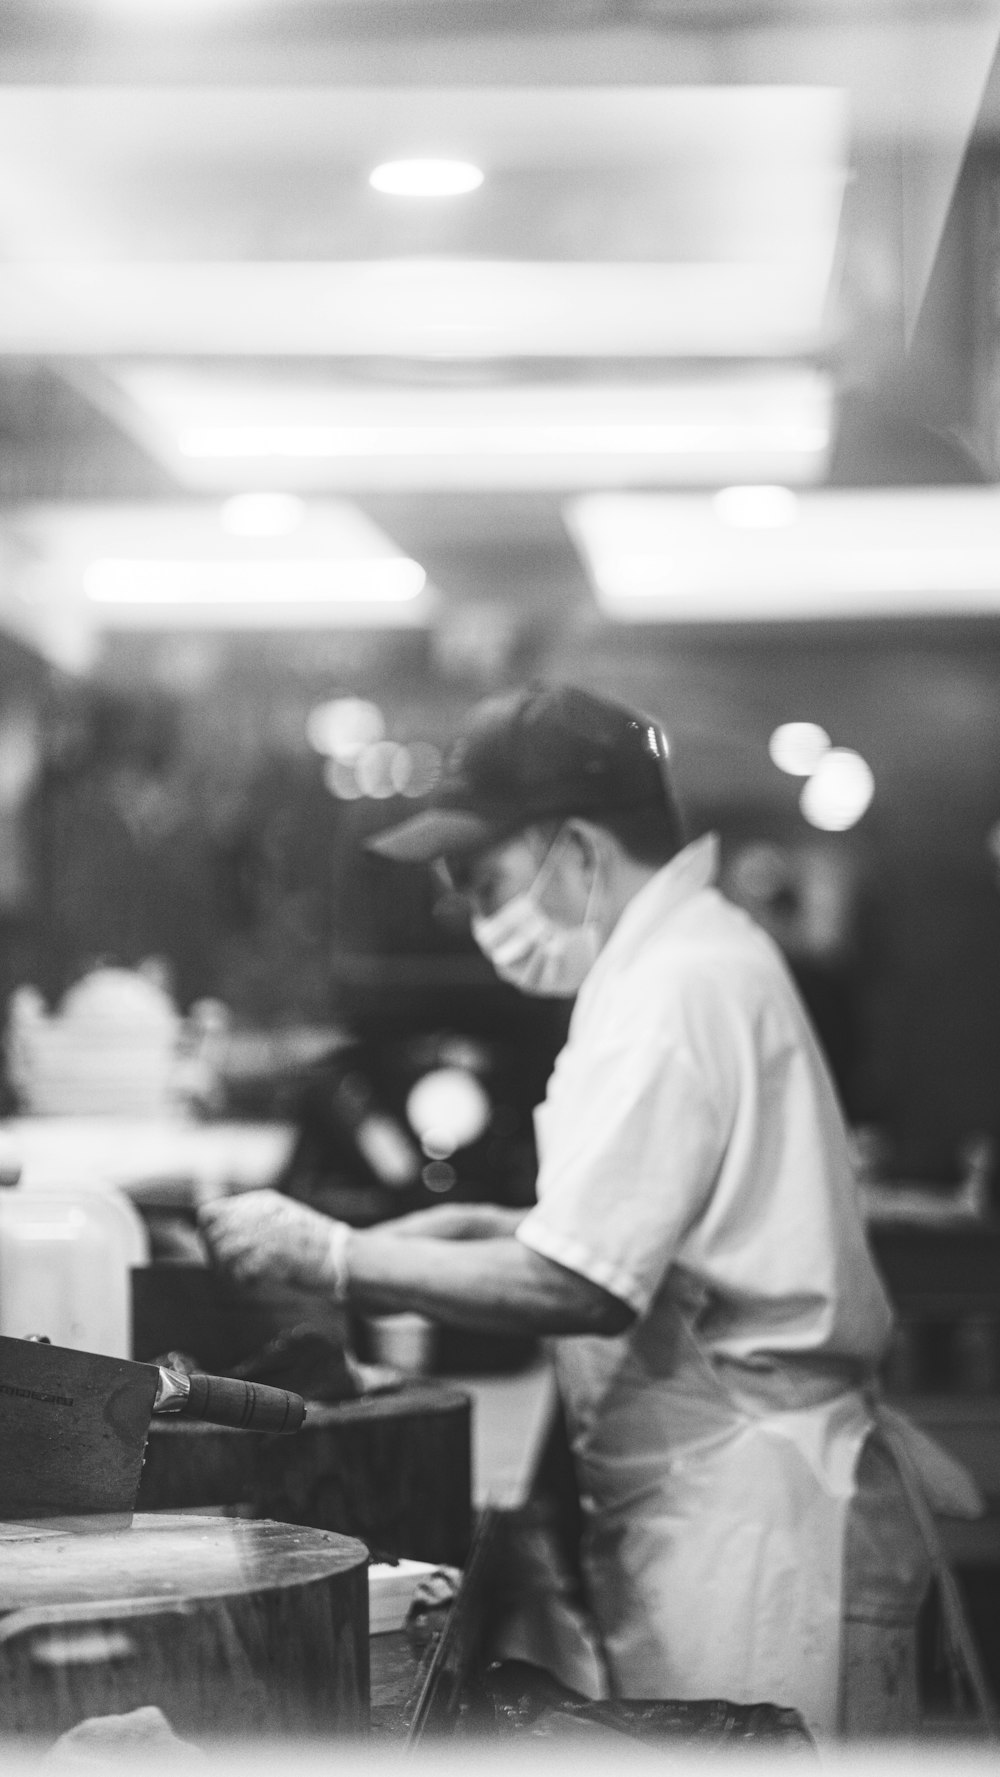 a black and white photo of a man working in a restaurant